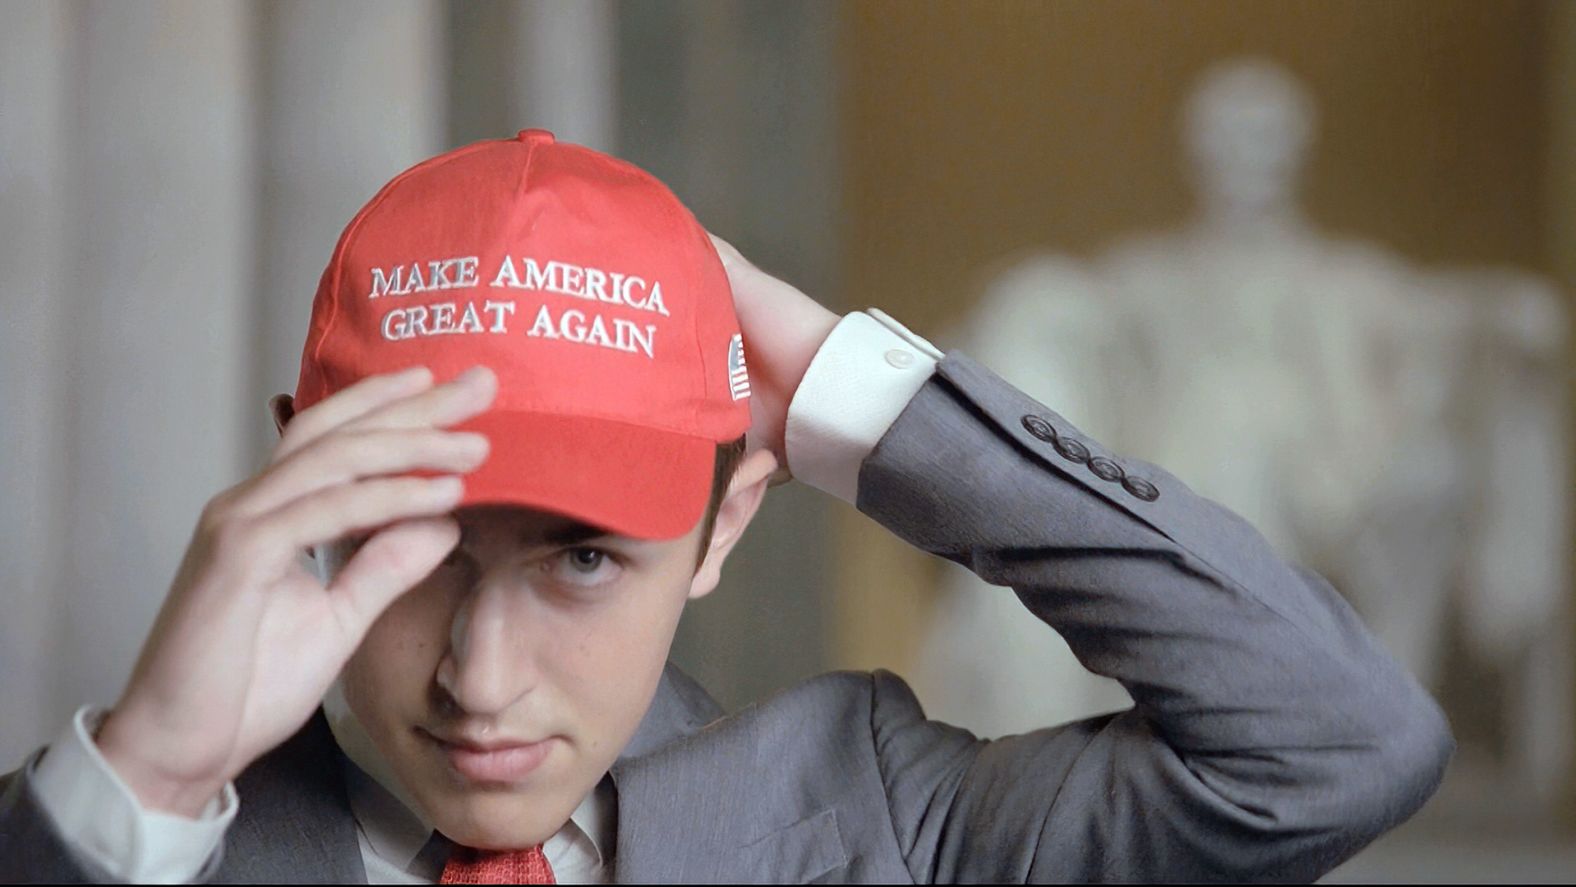 Nicholas Sandmann, a Kentucky teenager who was at the center of a viral video controversy, used his personal story to condemn cancel culture and argue that Trump and conservatives are treated unfairly by the press. "While much more must be done, I look forward to the day that the media returns to providing balanced, responsible and accountable news coverage," <a href="https://www.cnn.com/politics/live-news/rnc-2020-day-2/h_0cb227ccf4ca0b24323c589d490d49b4" target="_blank">he said Tuesday.</a>